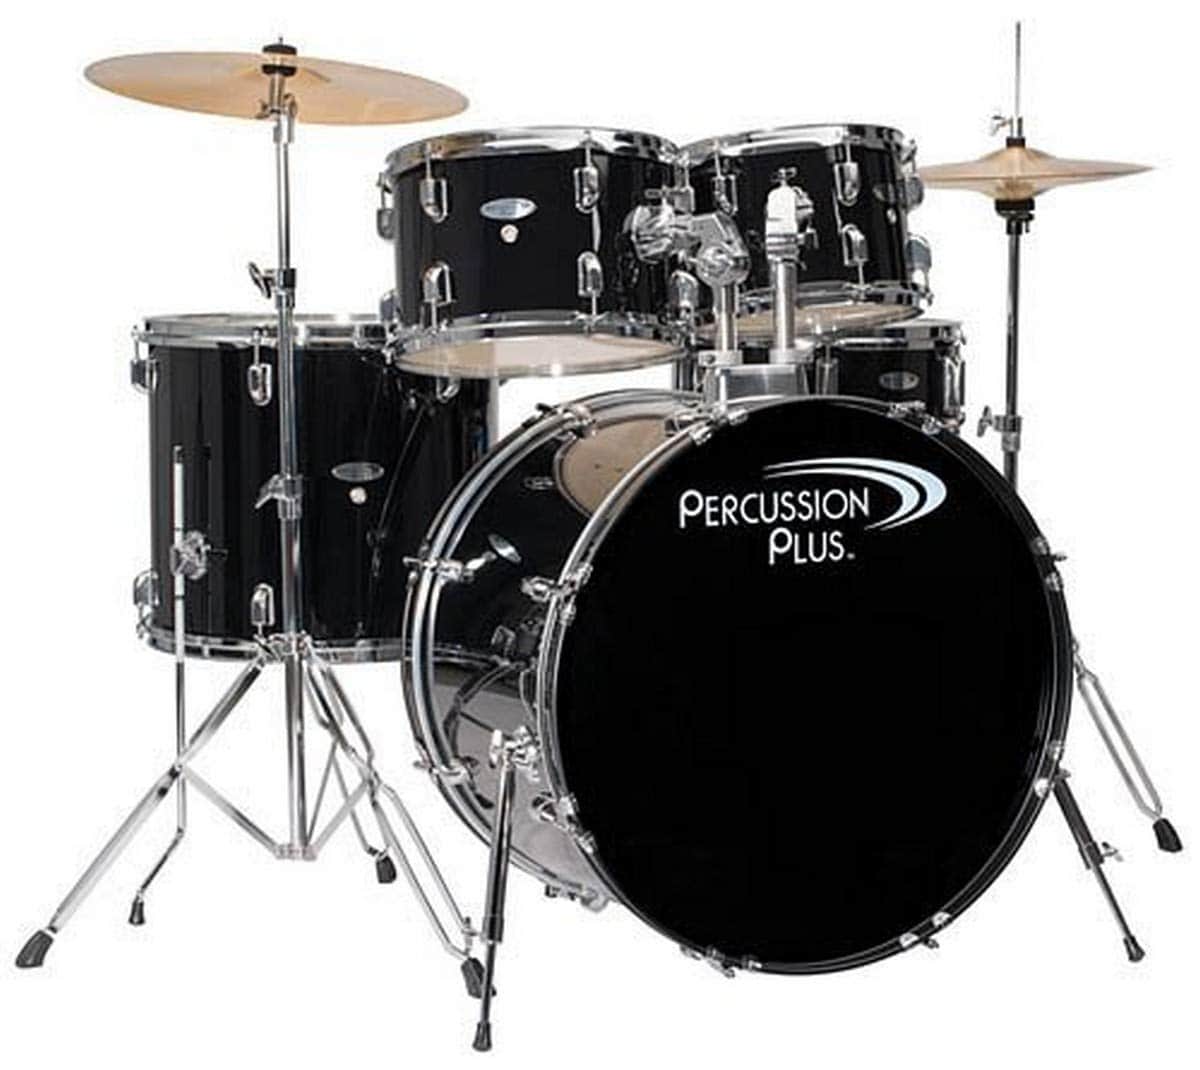 Best Percussion Plus Drum Sets: A Comprehensive Buying Guide